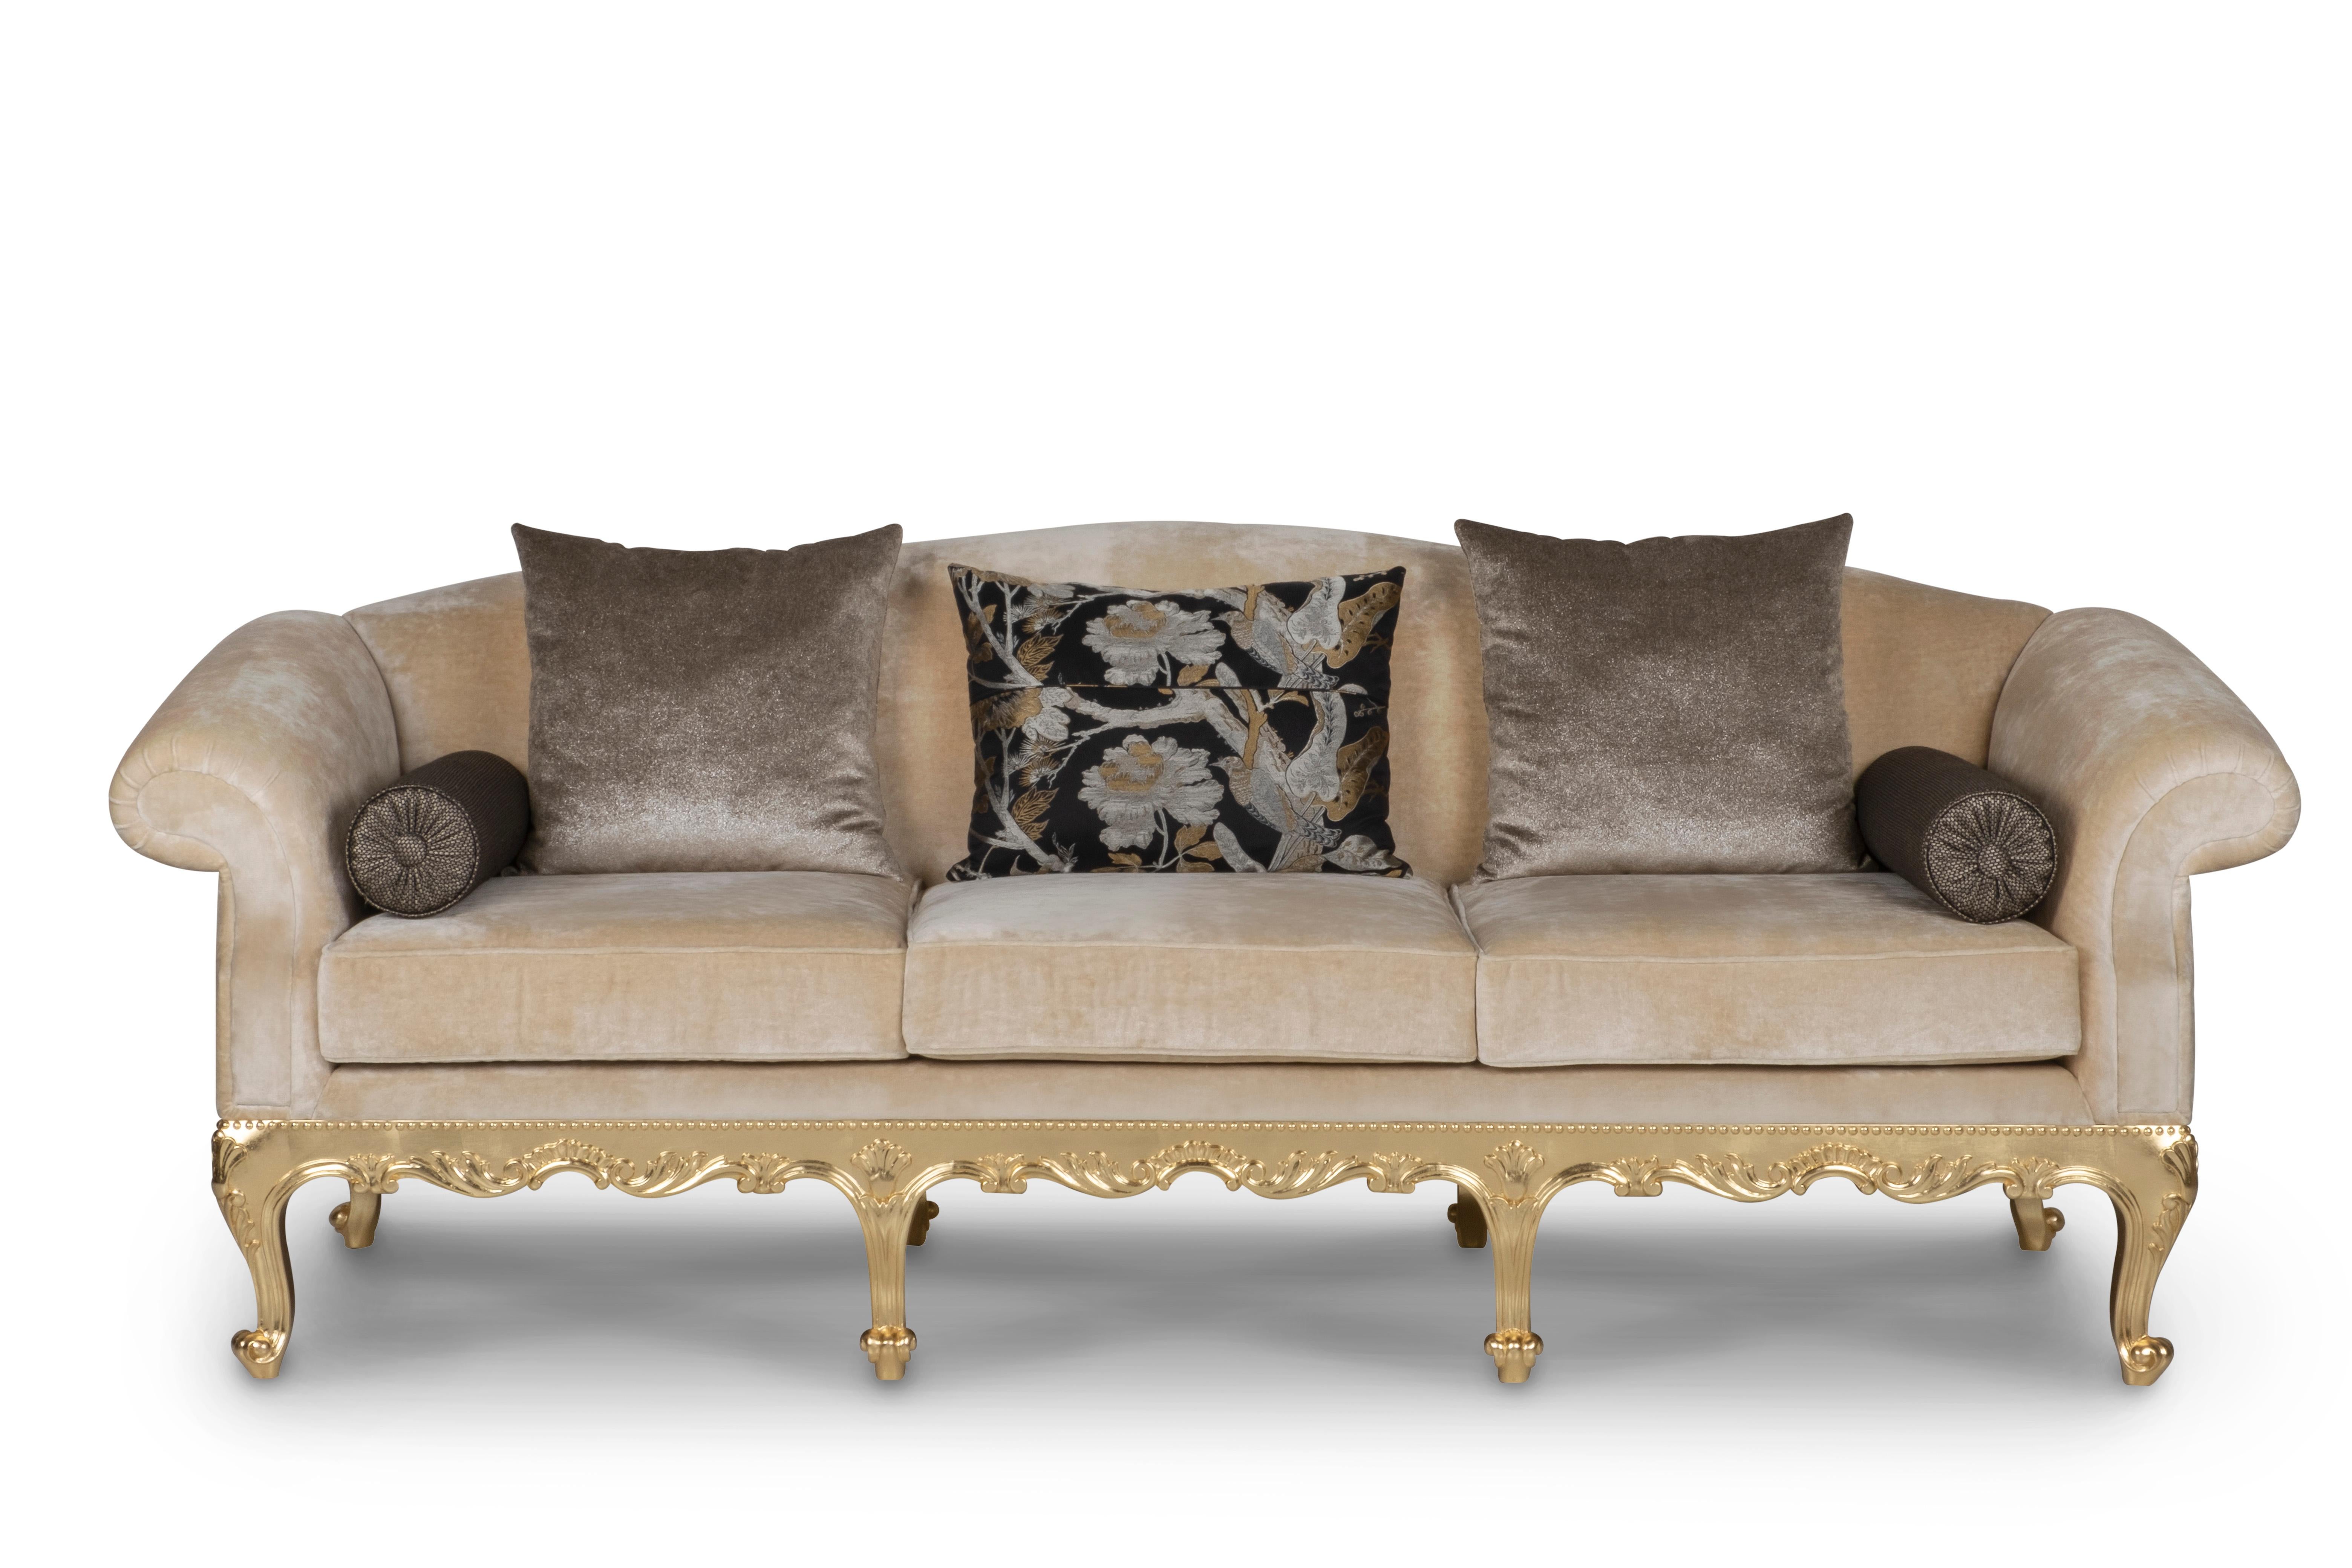 Sofa Dormeuse, Neoclassical Collection, Handcrafted in Portugal - Europe by GF Modern.

The sofa Dormeuse adds a sophisticated and refined touch to any living area. The sofa is upholstered in bronze an beige velvet with gold leaf details, exuding